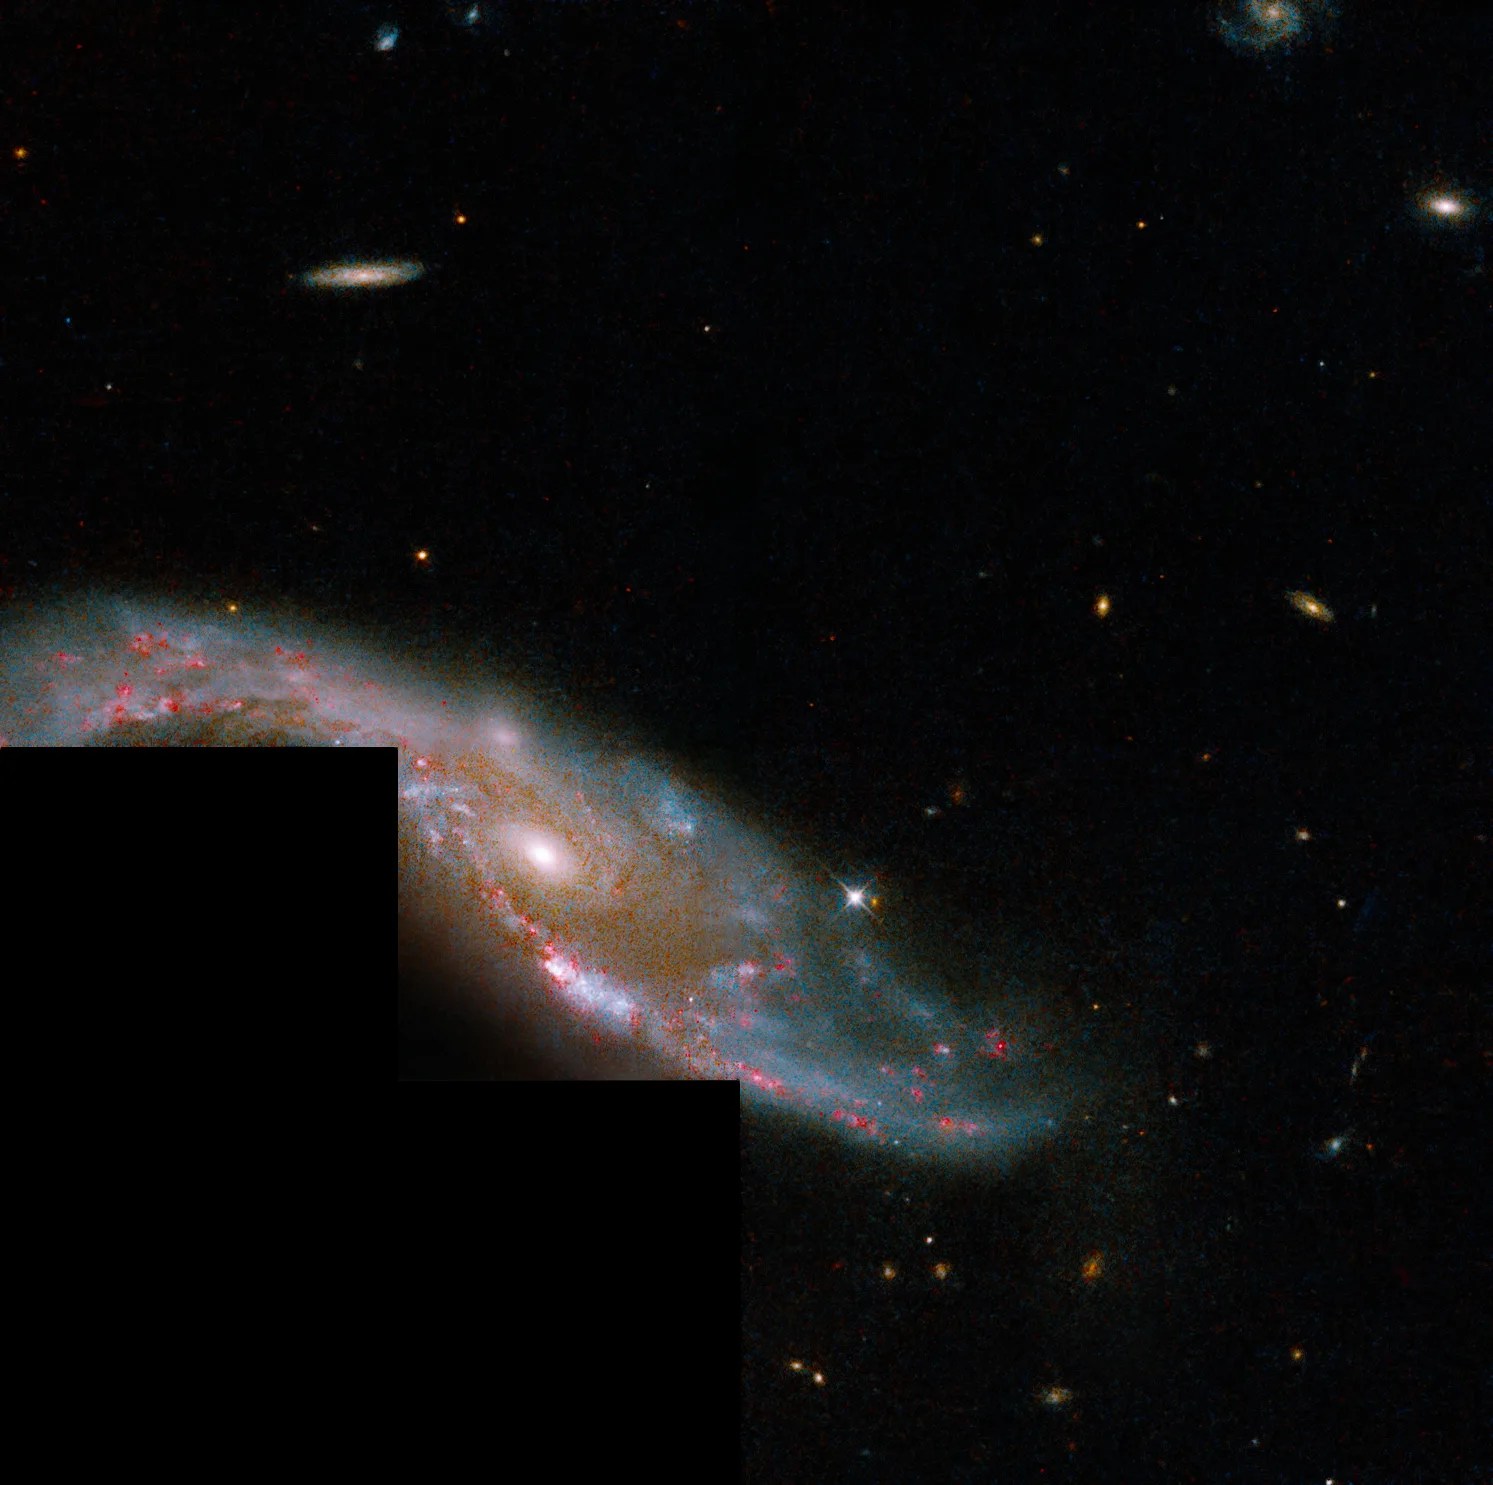 Spiral galaxy bisects the image from center left to bottom right. the lower left corner of the image is blacked out, a wfpc2 artifact.